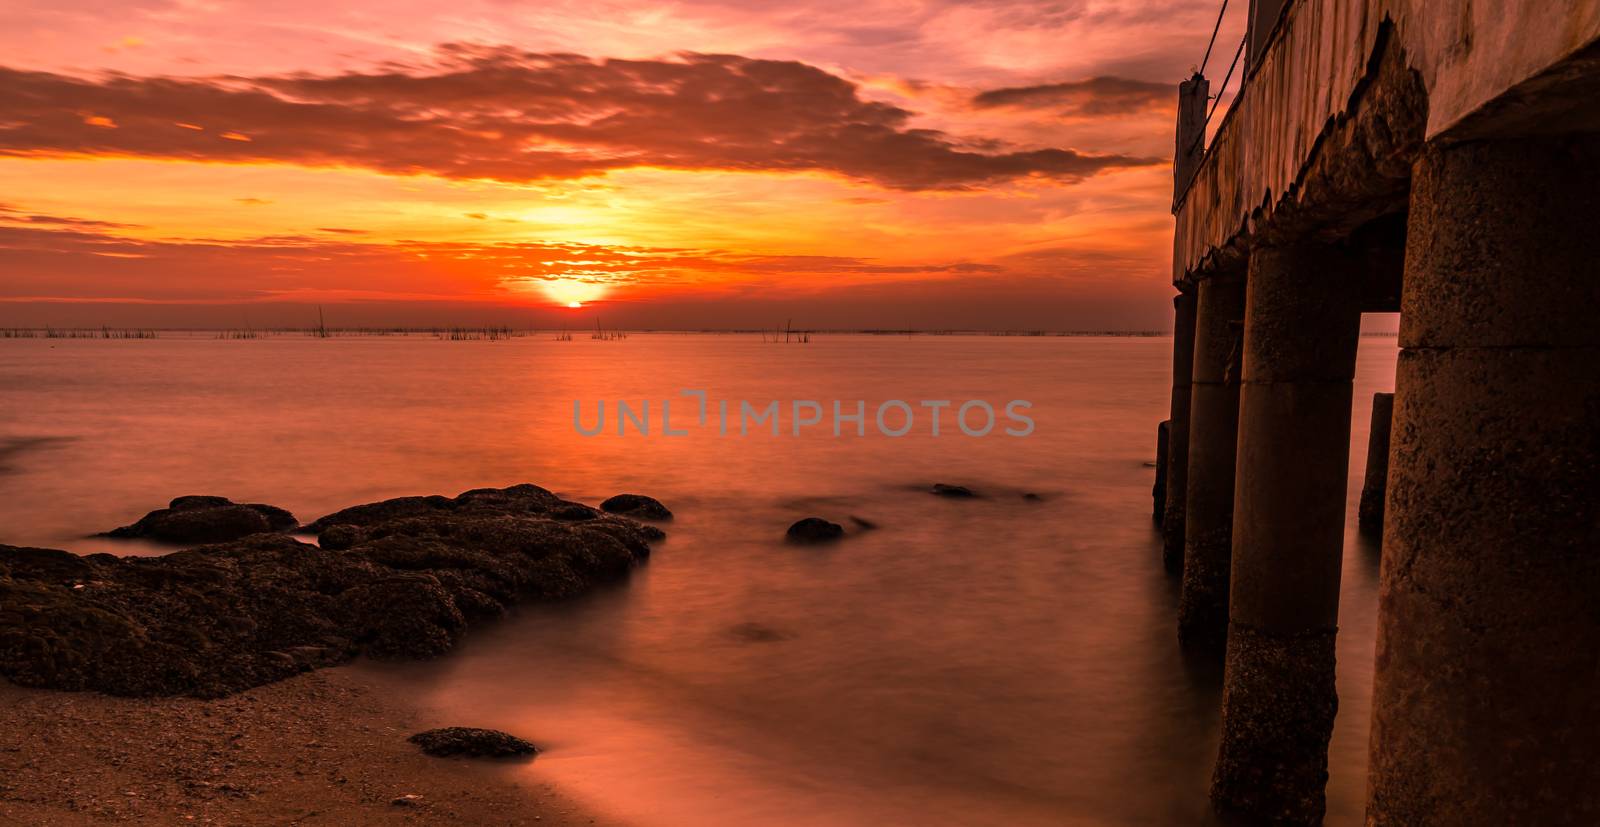 A long exposure landscape of beautiful sunset at the sea beach near concrete bridge with orange sky, clouds and stone by Fahroni